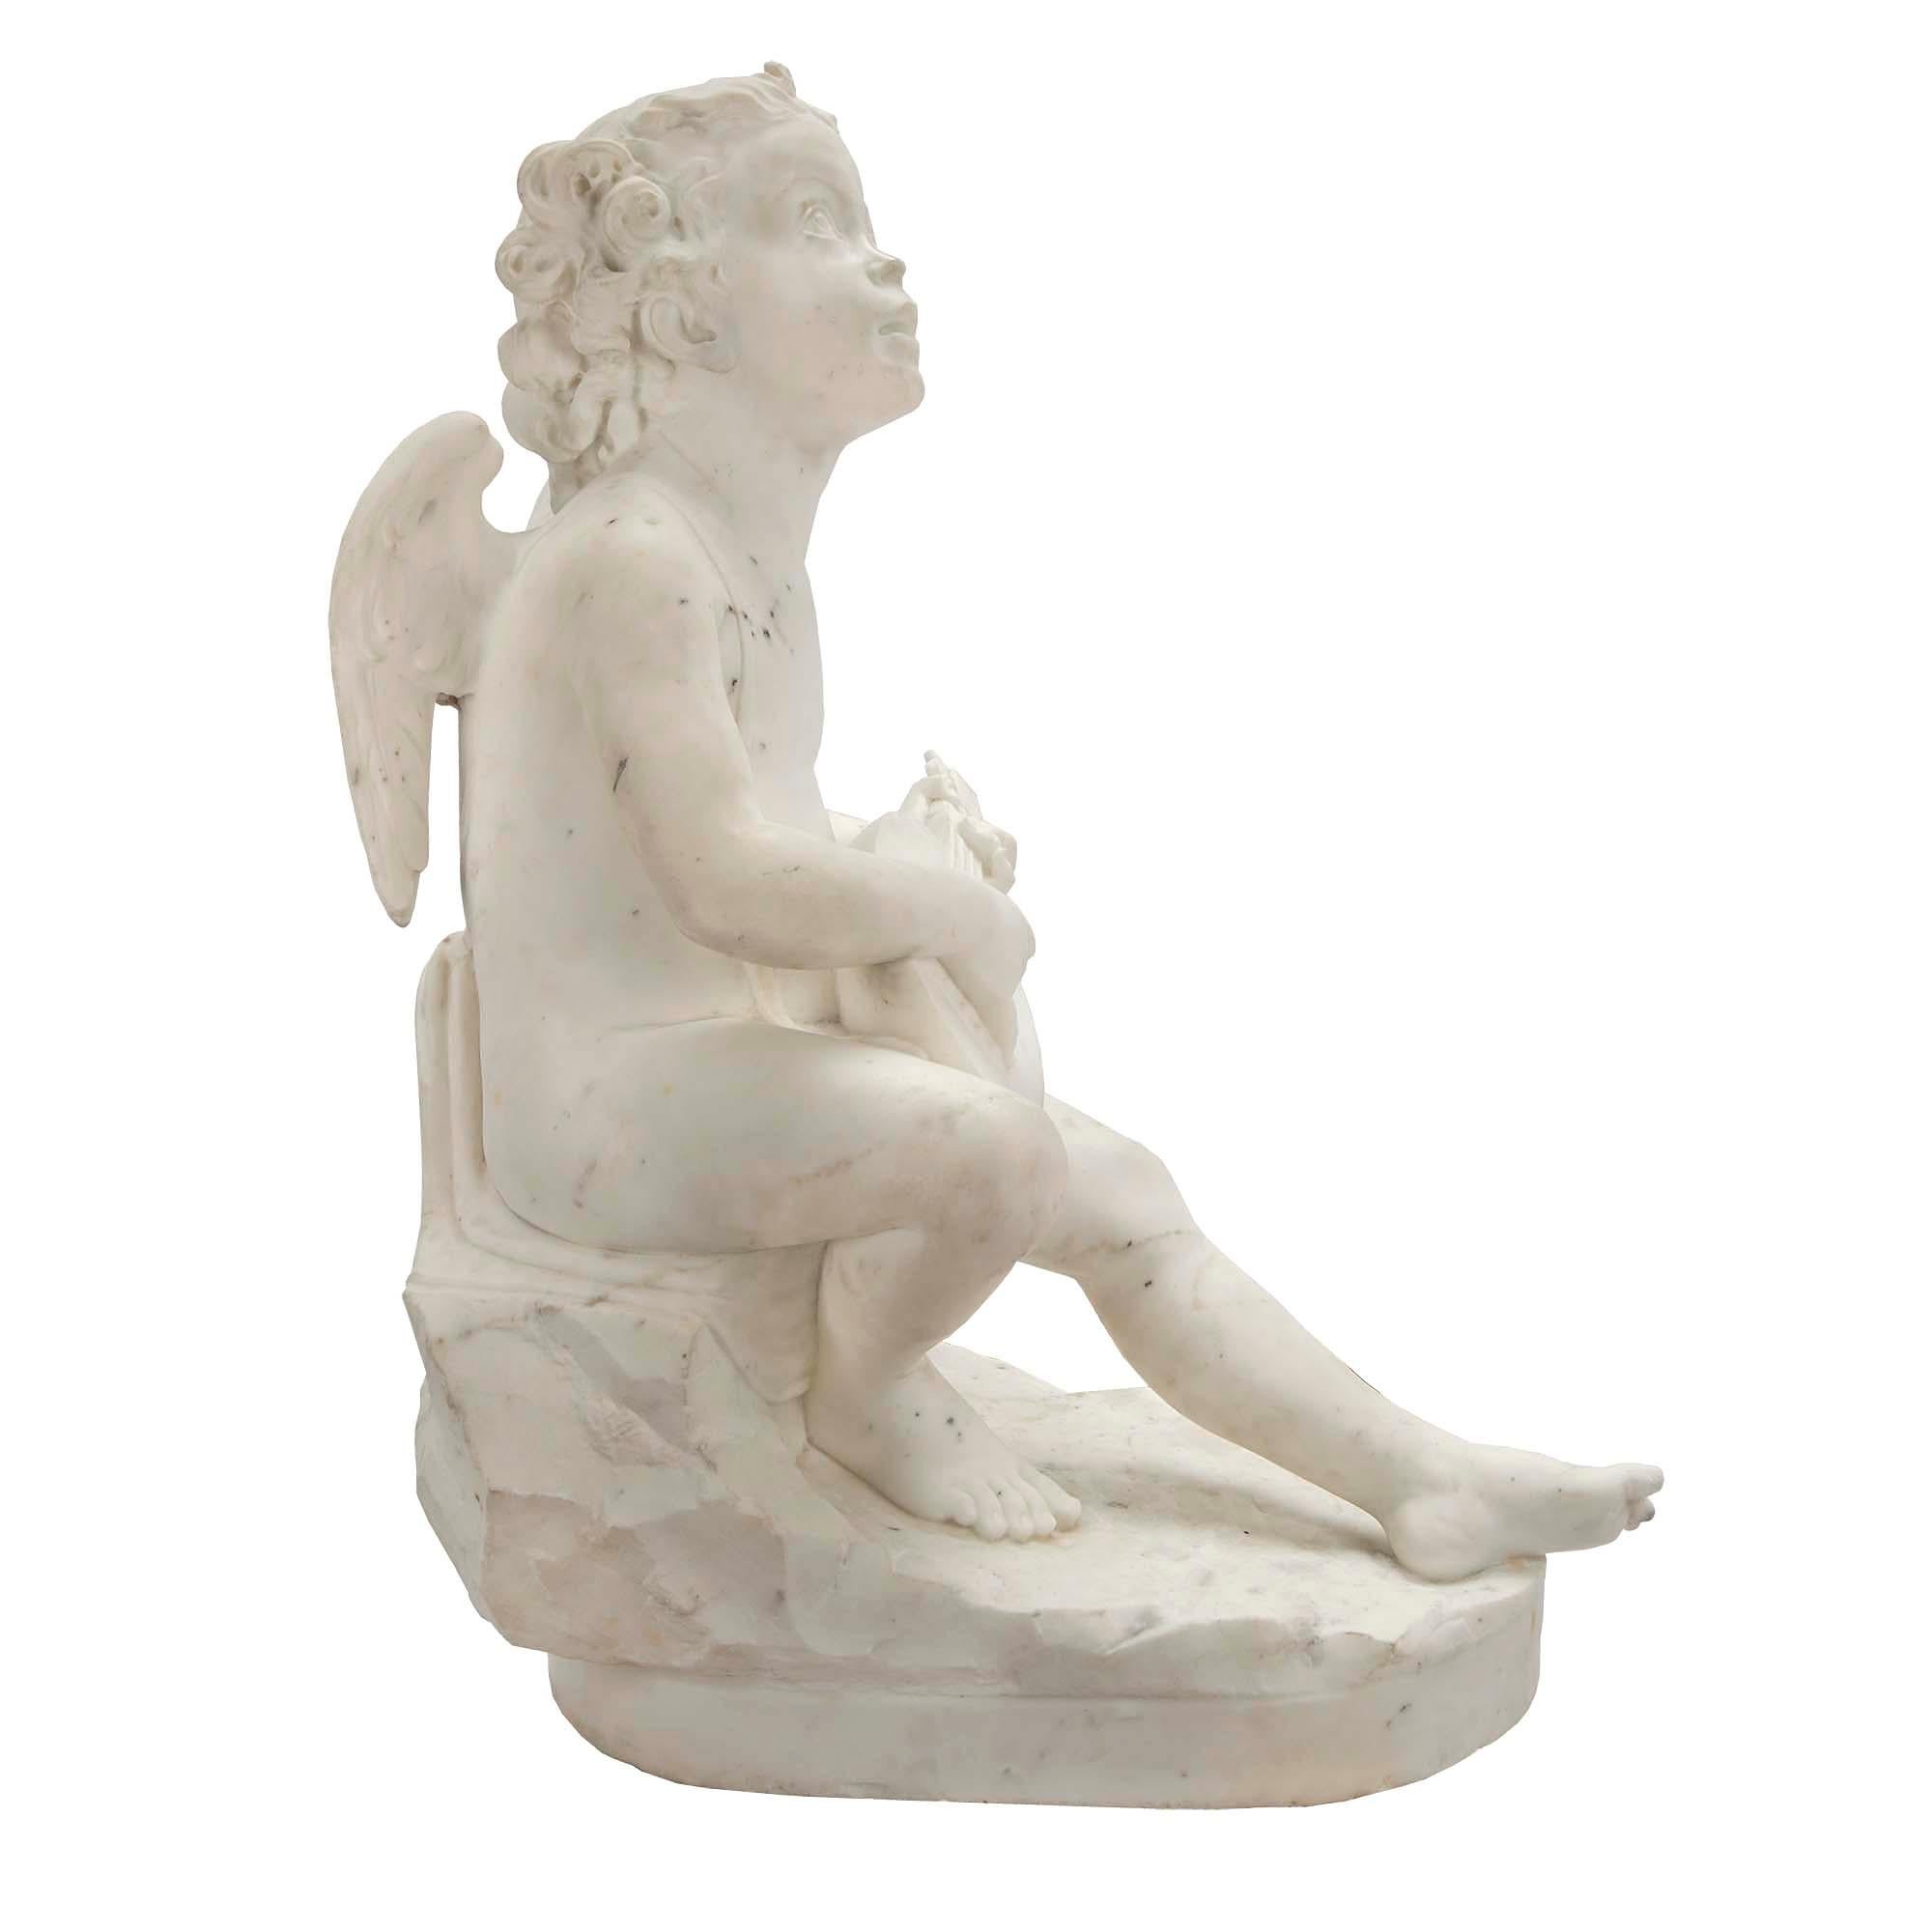 A charming and high-quality Italian 19th century white Carrara marble statue of a little winged cherub with his guitar. The statue is raised by an oval base with a rocky ground design, where the cherub is seated on a rock. He joyously looks up at